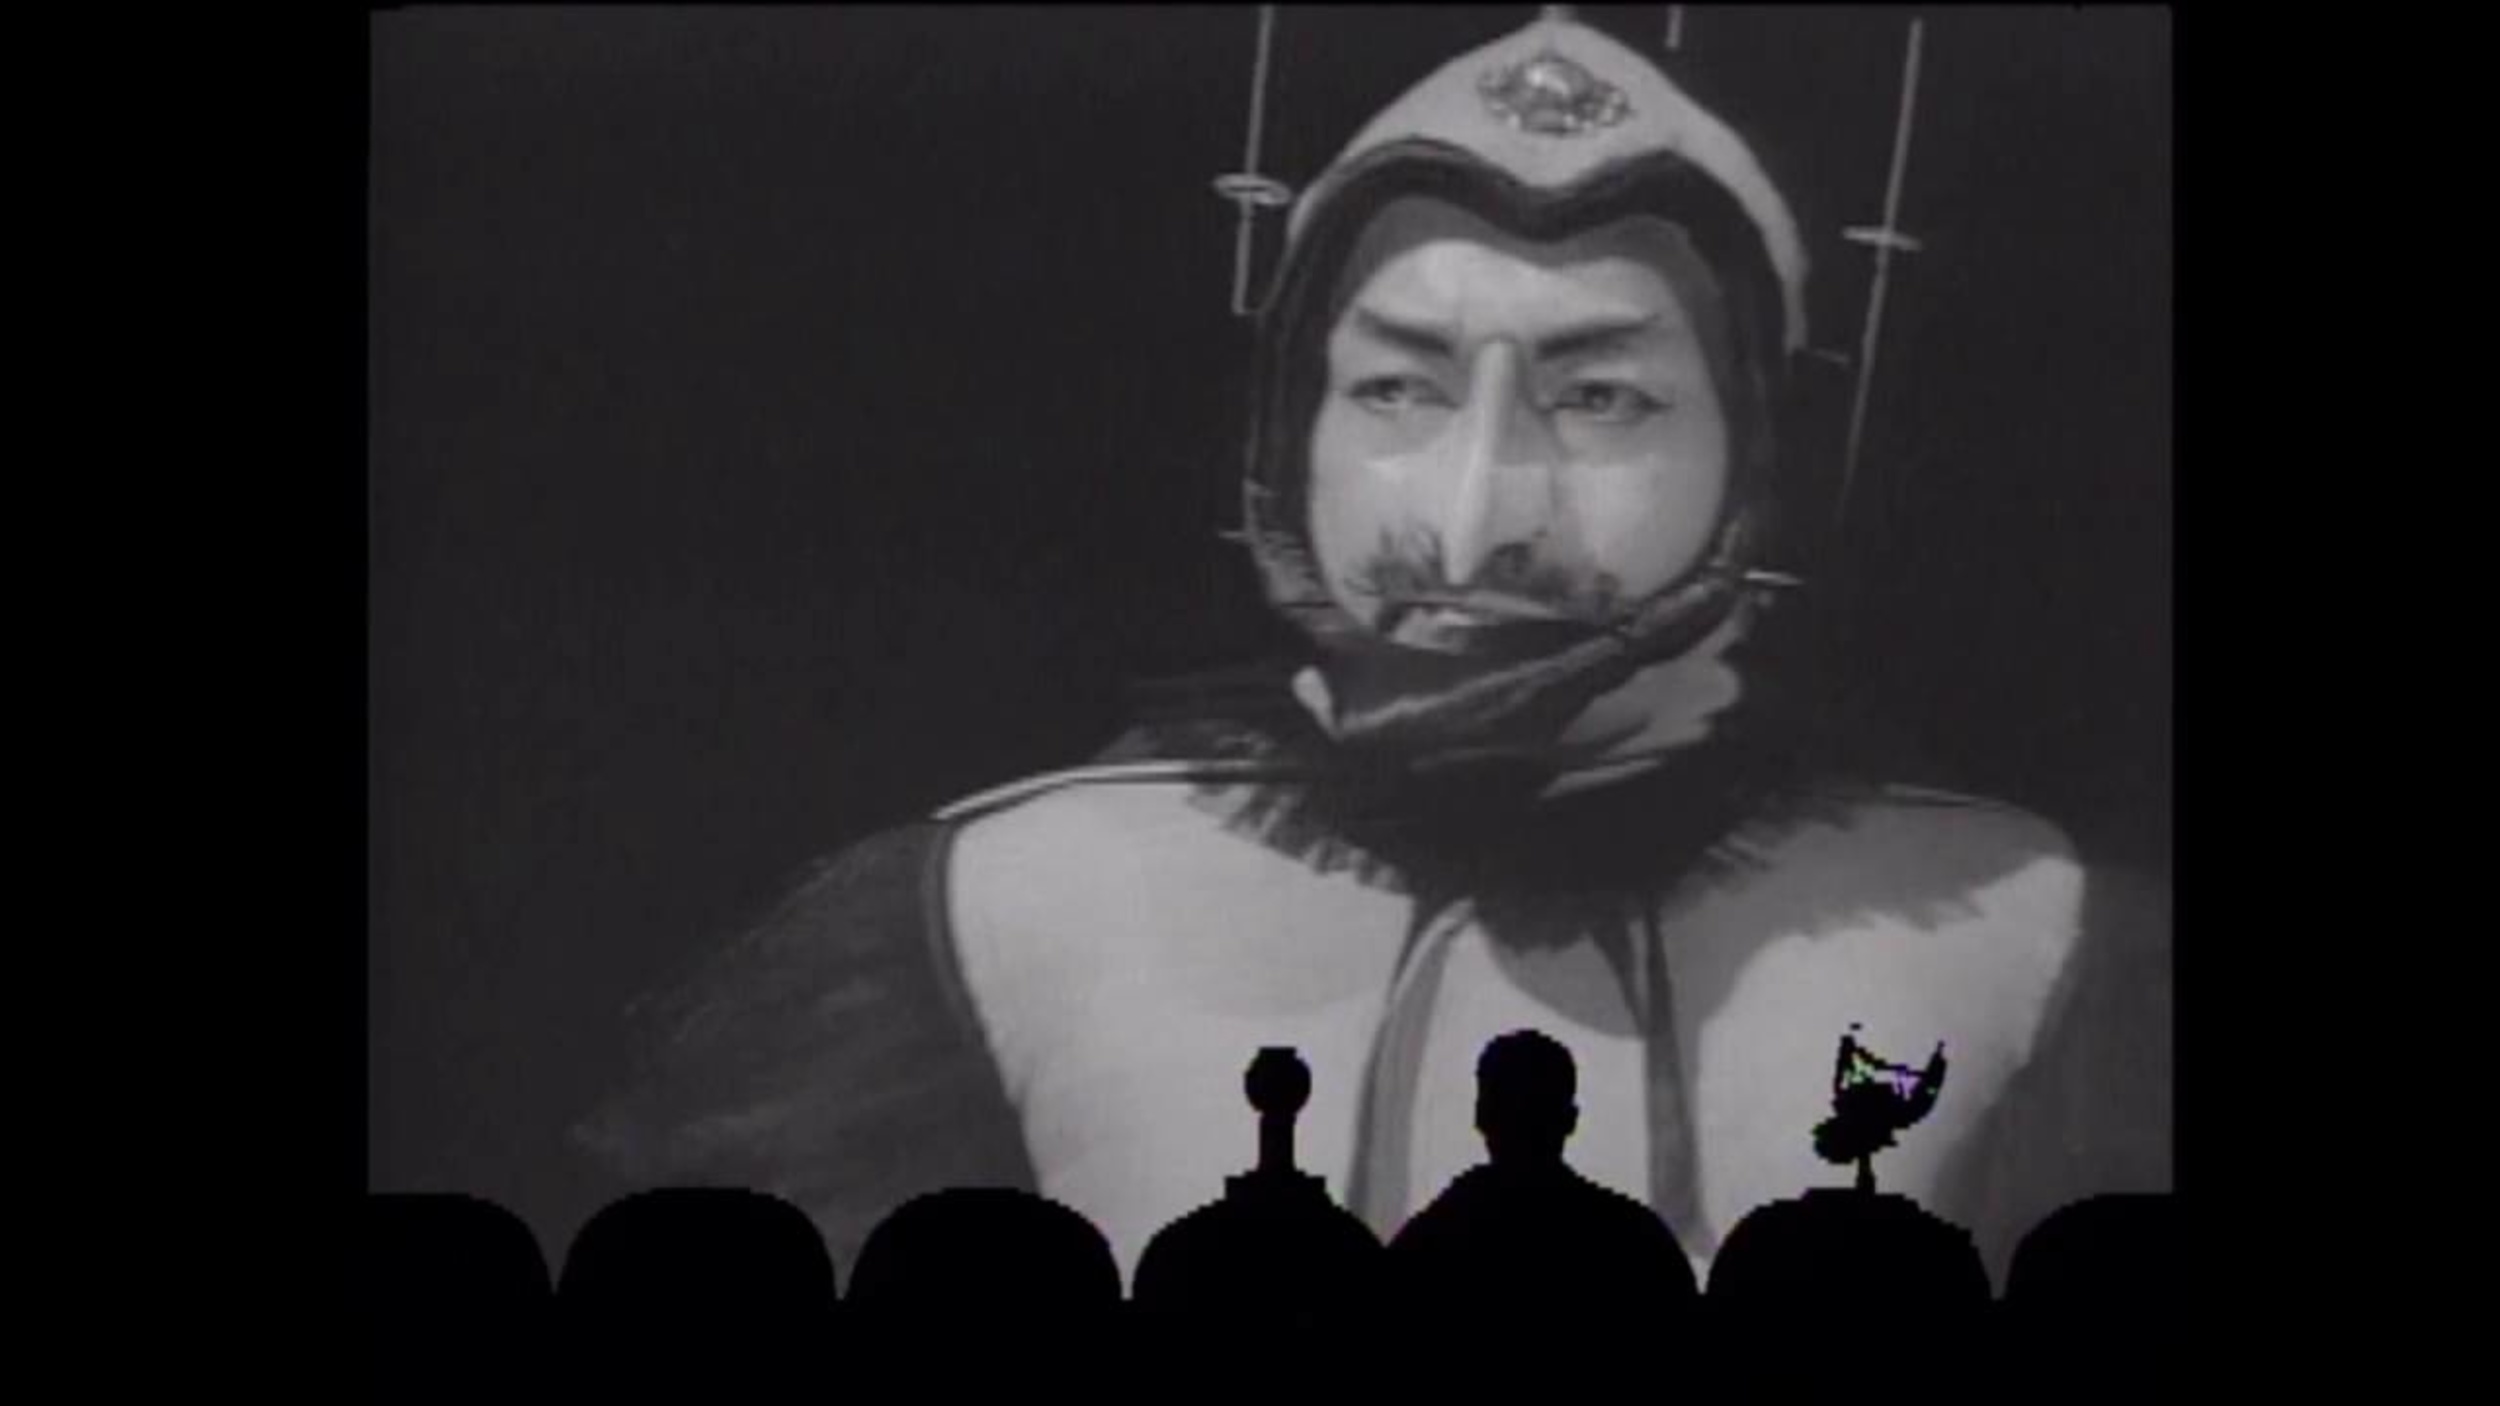 <p>The eighth season of “MST3K” was the first one on Sci-Fi Channel after its run on Comedy Central ended. As such, it tried to make the show a little more, well, science fiction-y. This included Mike Nelson and his robot pals being chased through time and space by Pearl Forrester and her cronies. In this episode, they arrive in Ancient Rome. Meanwhile, we all laugh at the villainous Krankor as he takes on the heroic Prince of Space.</p><p>You may also like: <a href='https://www.yardbarker.com/entertainment/articles/the_best_fake_films_from_seinfeld_111023/s1__35587613'>The best fake films from "Seinfeld"</a></p>